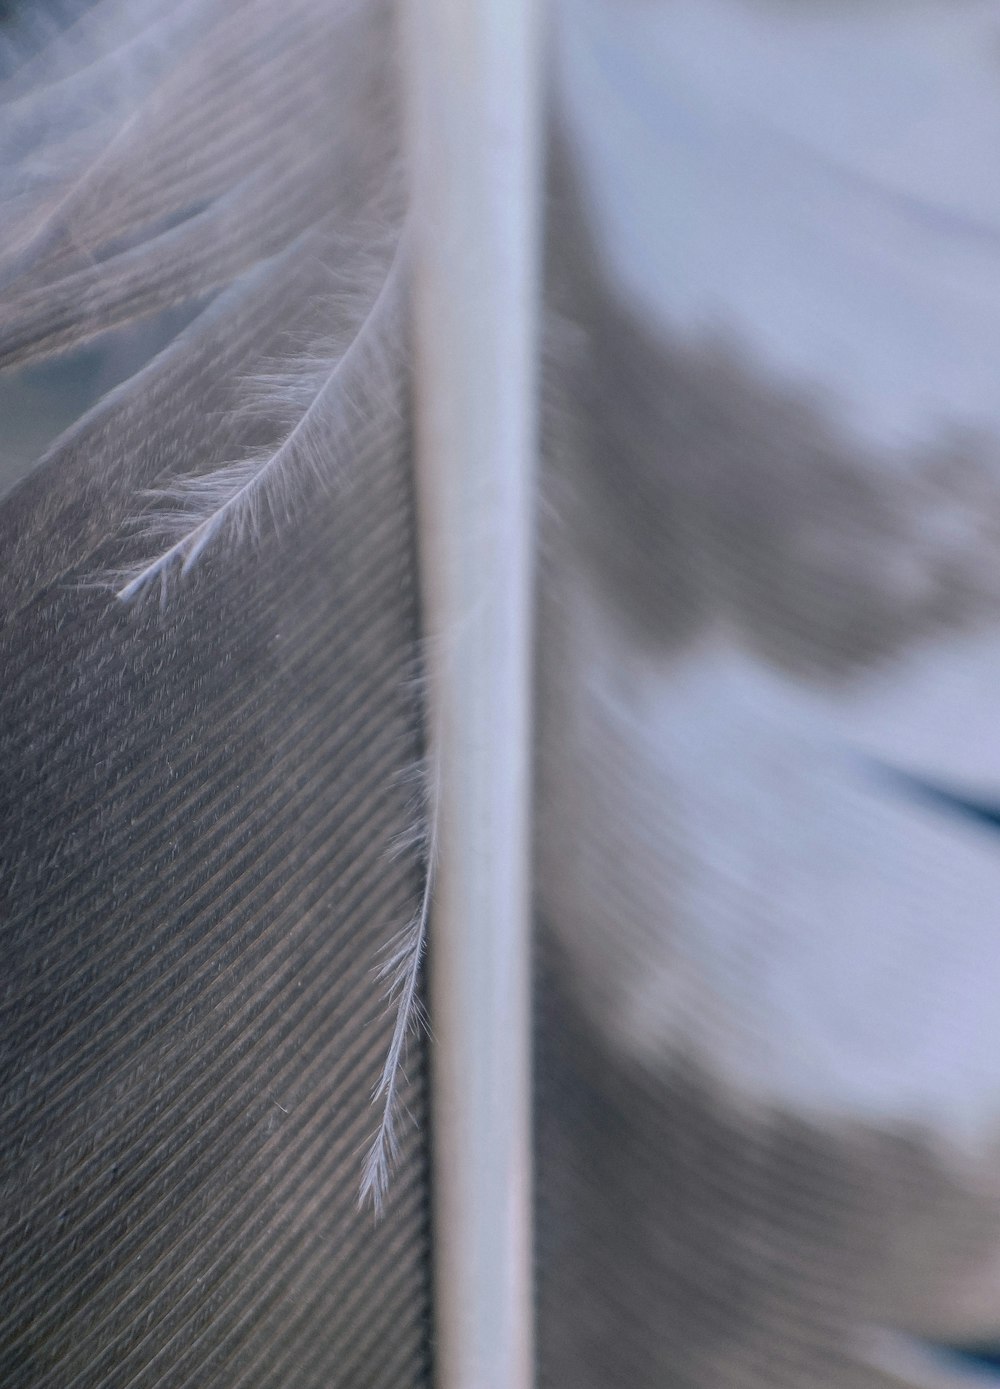 a close up of a feather with a blurry background